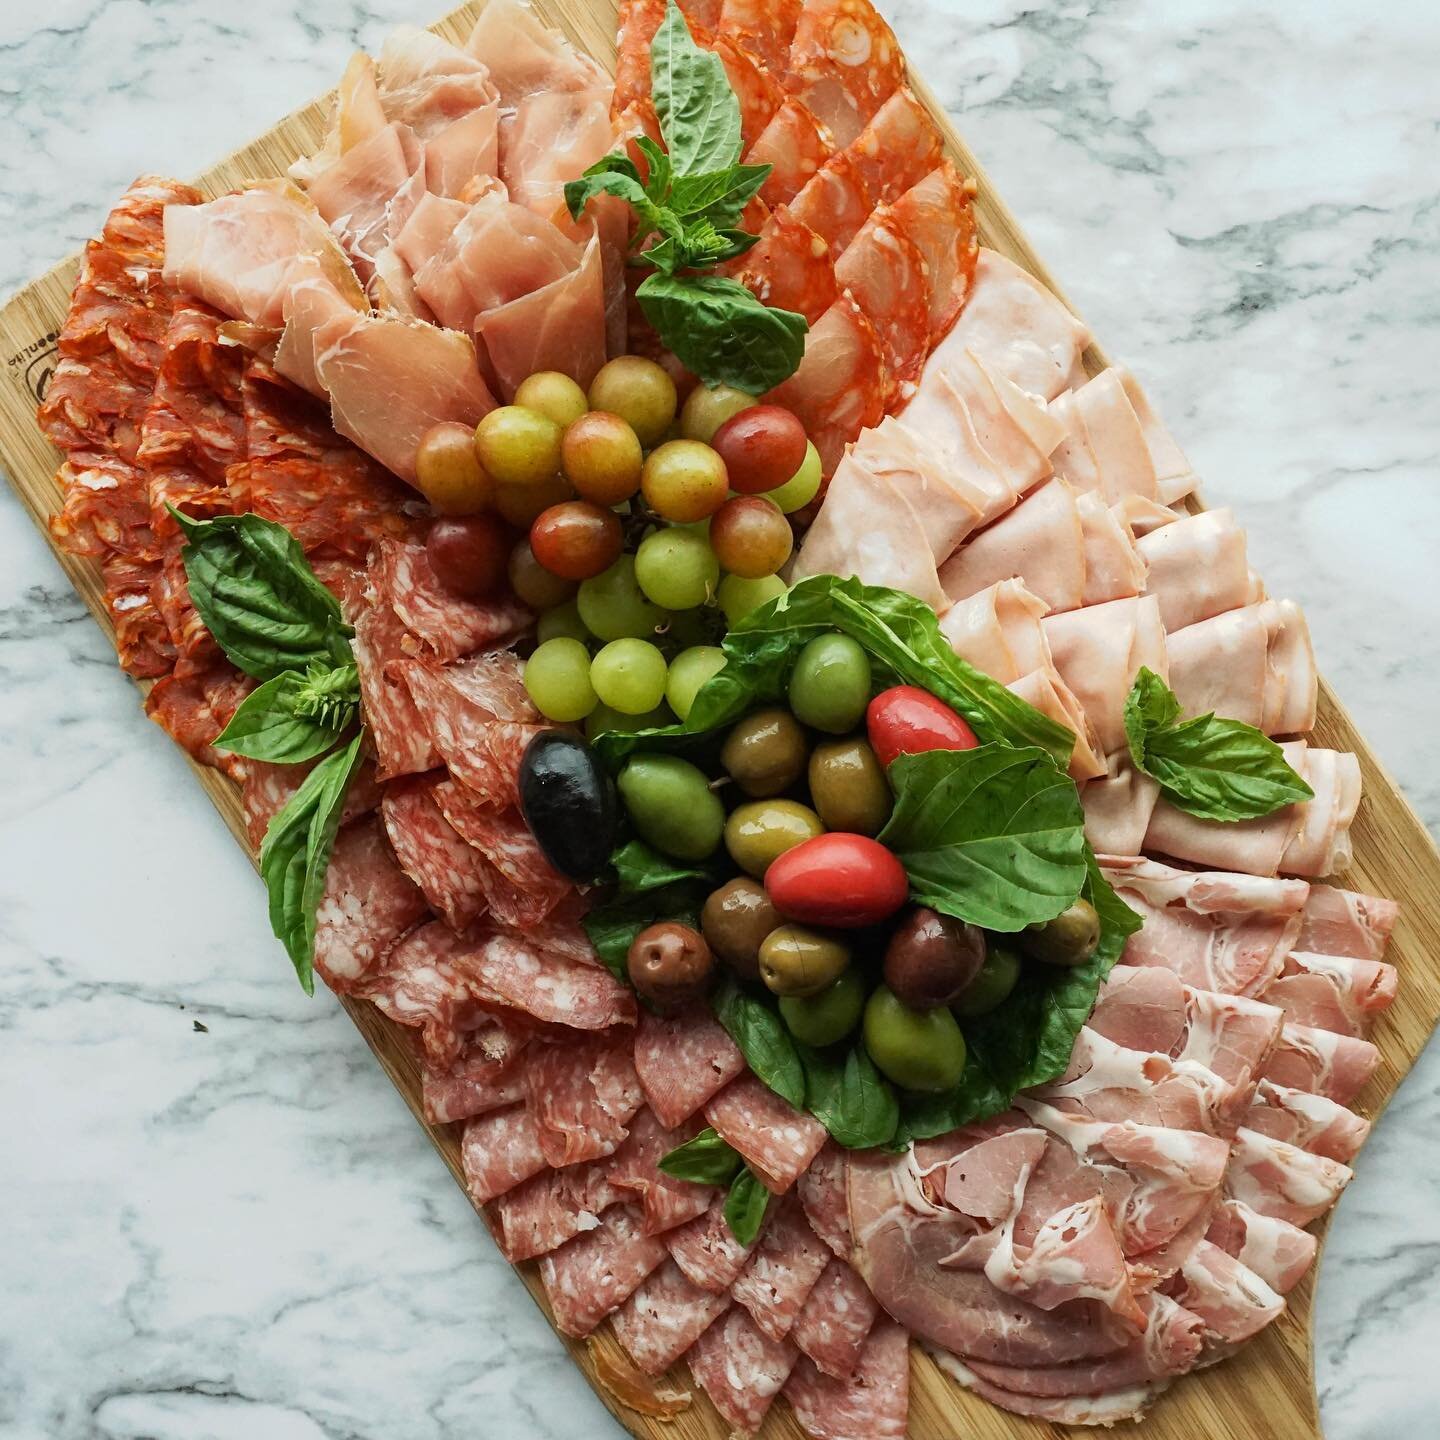 Let us put together the perfect charcuterie board for you! The best selection of cold cuts, cheeses, pickled vegetables, veggies or fruit. Our trays are work of art that everyone loves! Email our catering department at catering@linasmarket.com for mo